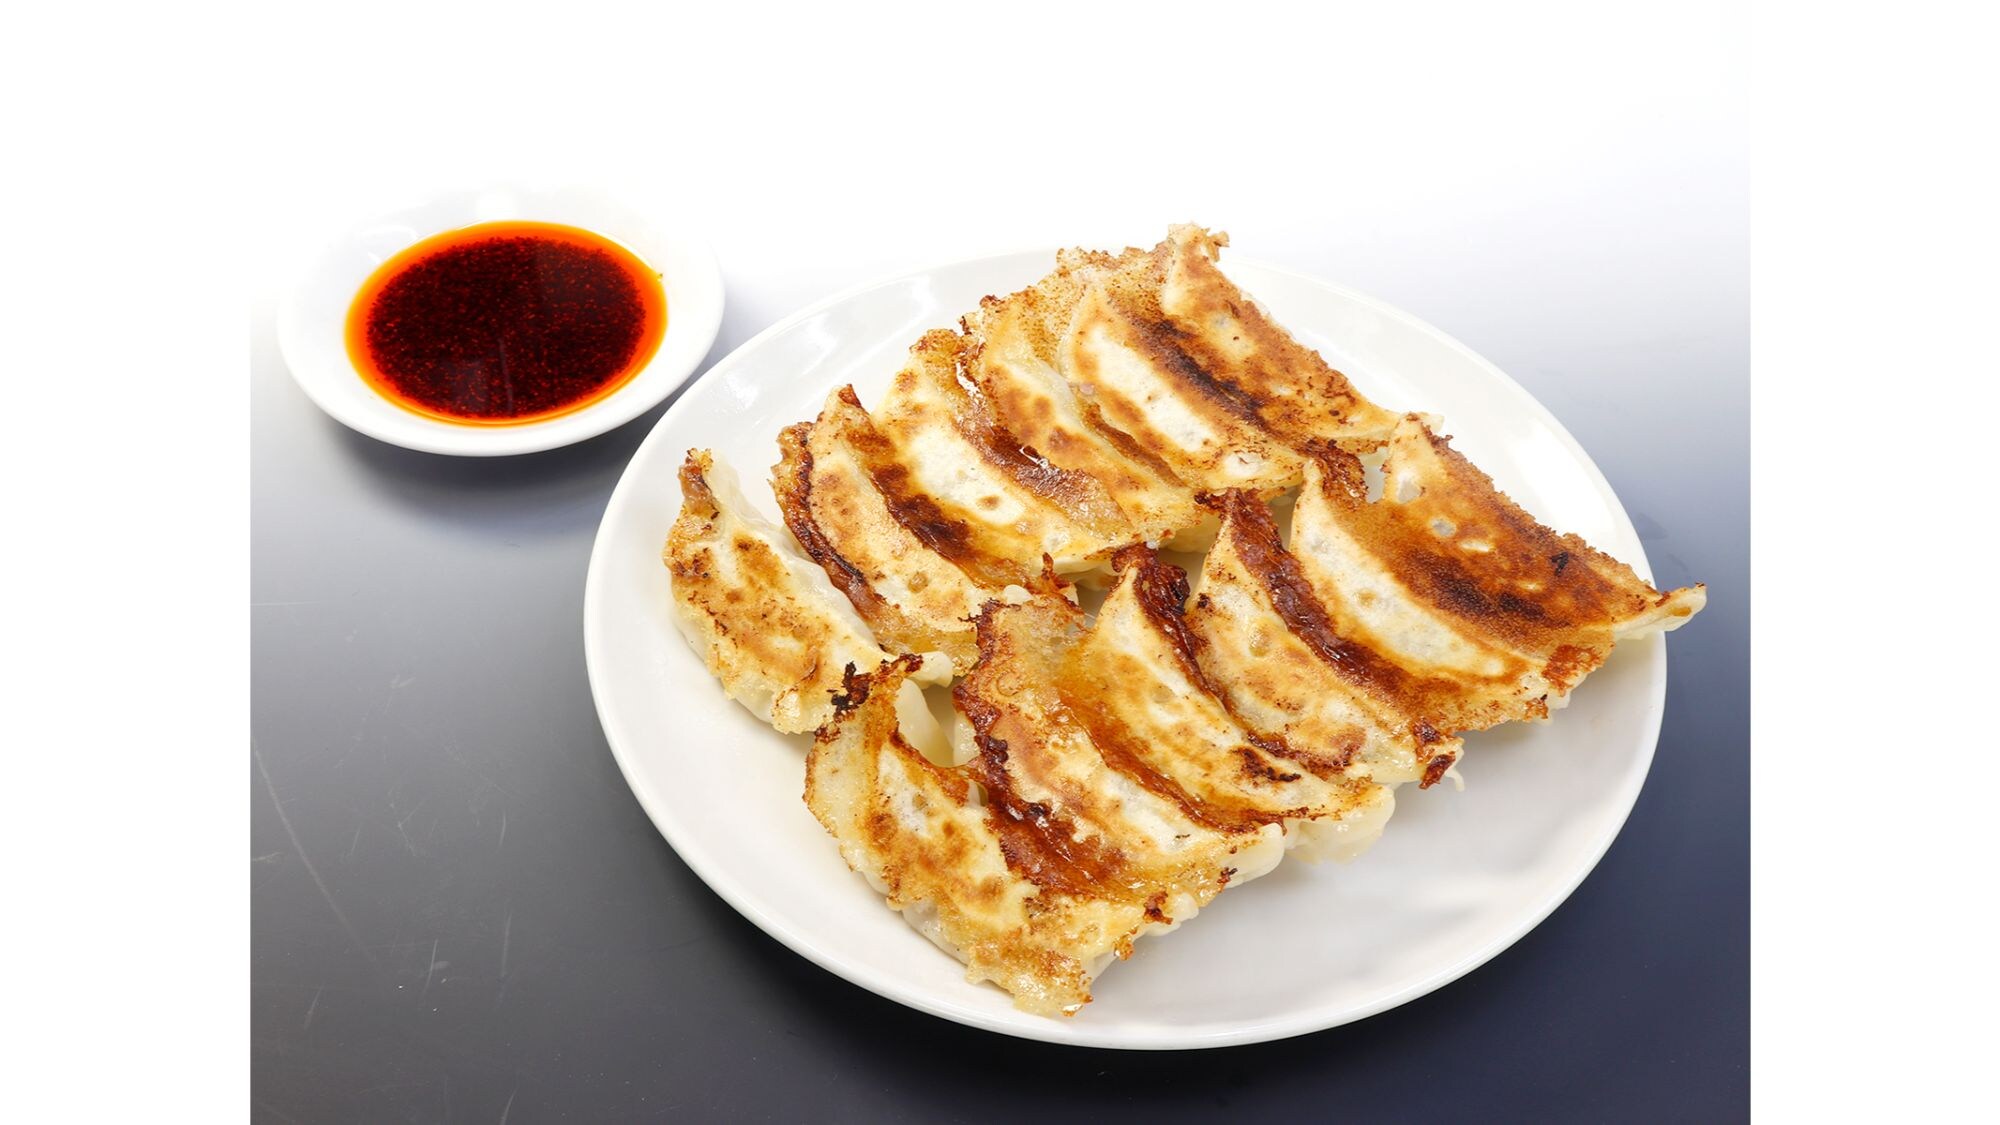 Supper example (Manshuen) / Traditional grilled dumpling double